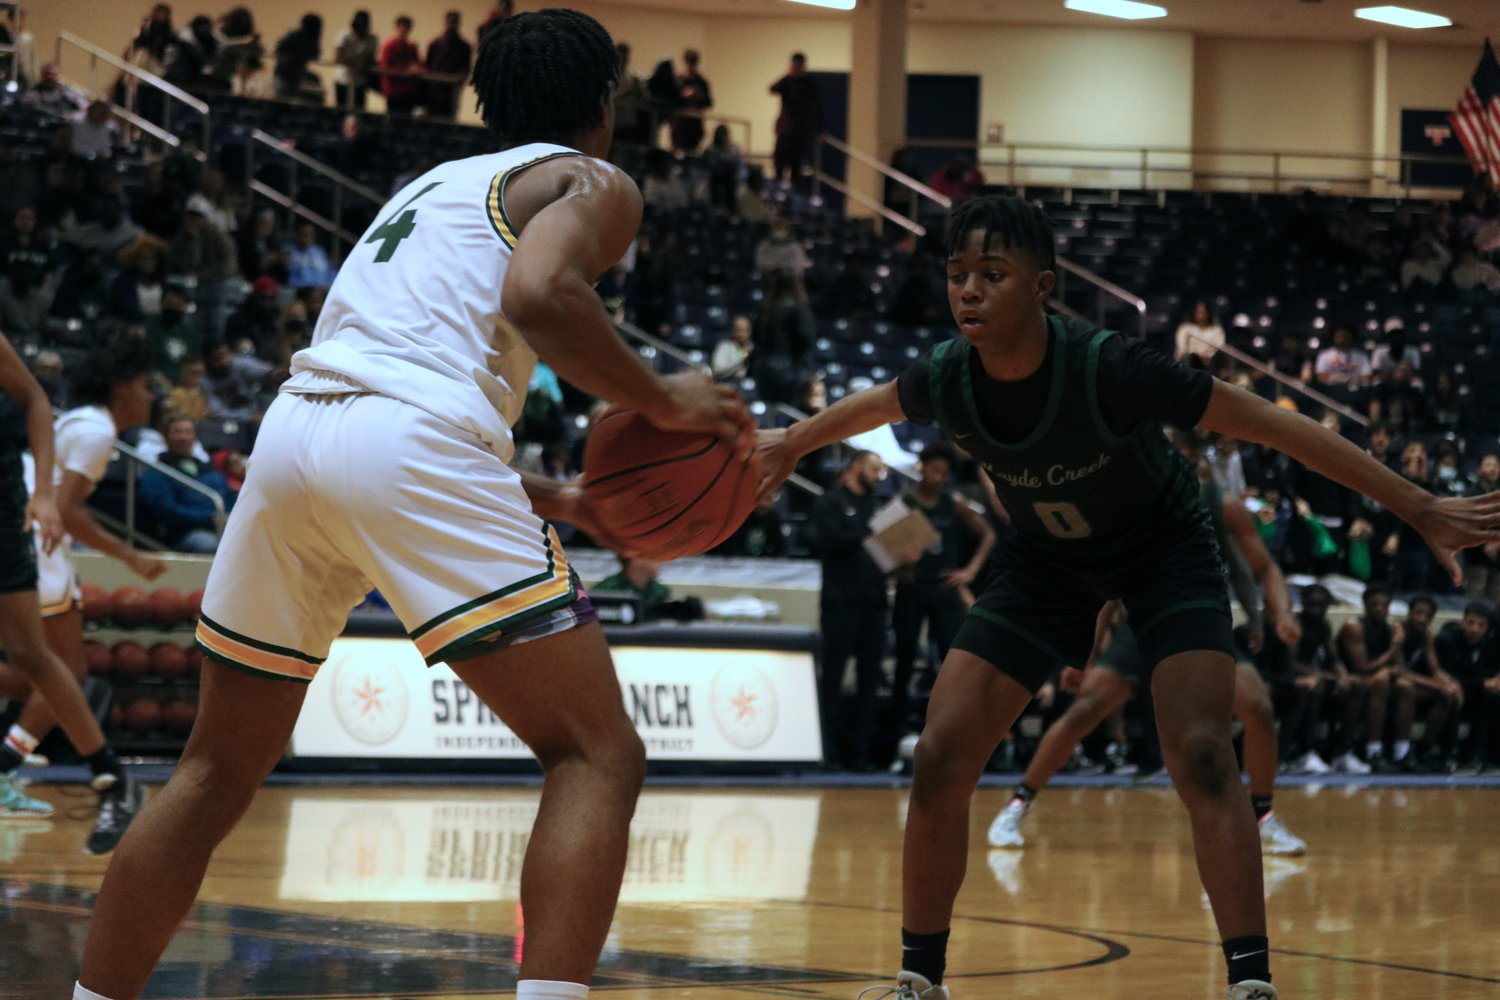 Mac Reed III defends during Friday’s game between Mayde Creek and Stratford at the Coleman Coliseum.